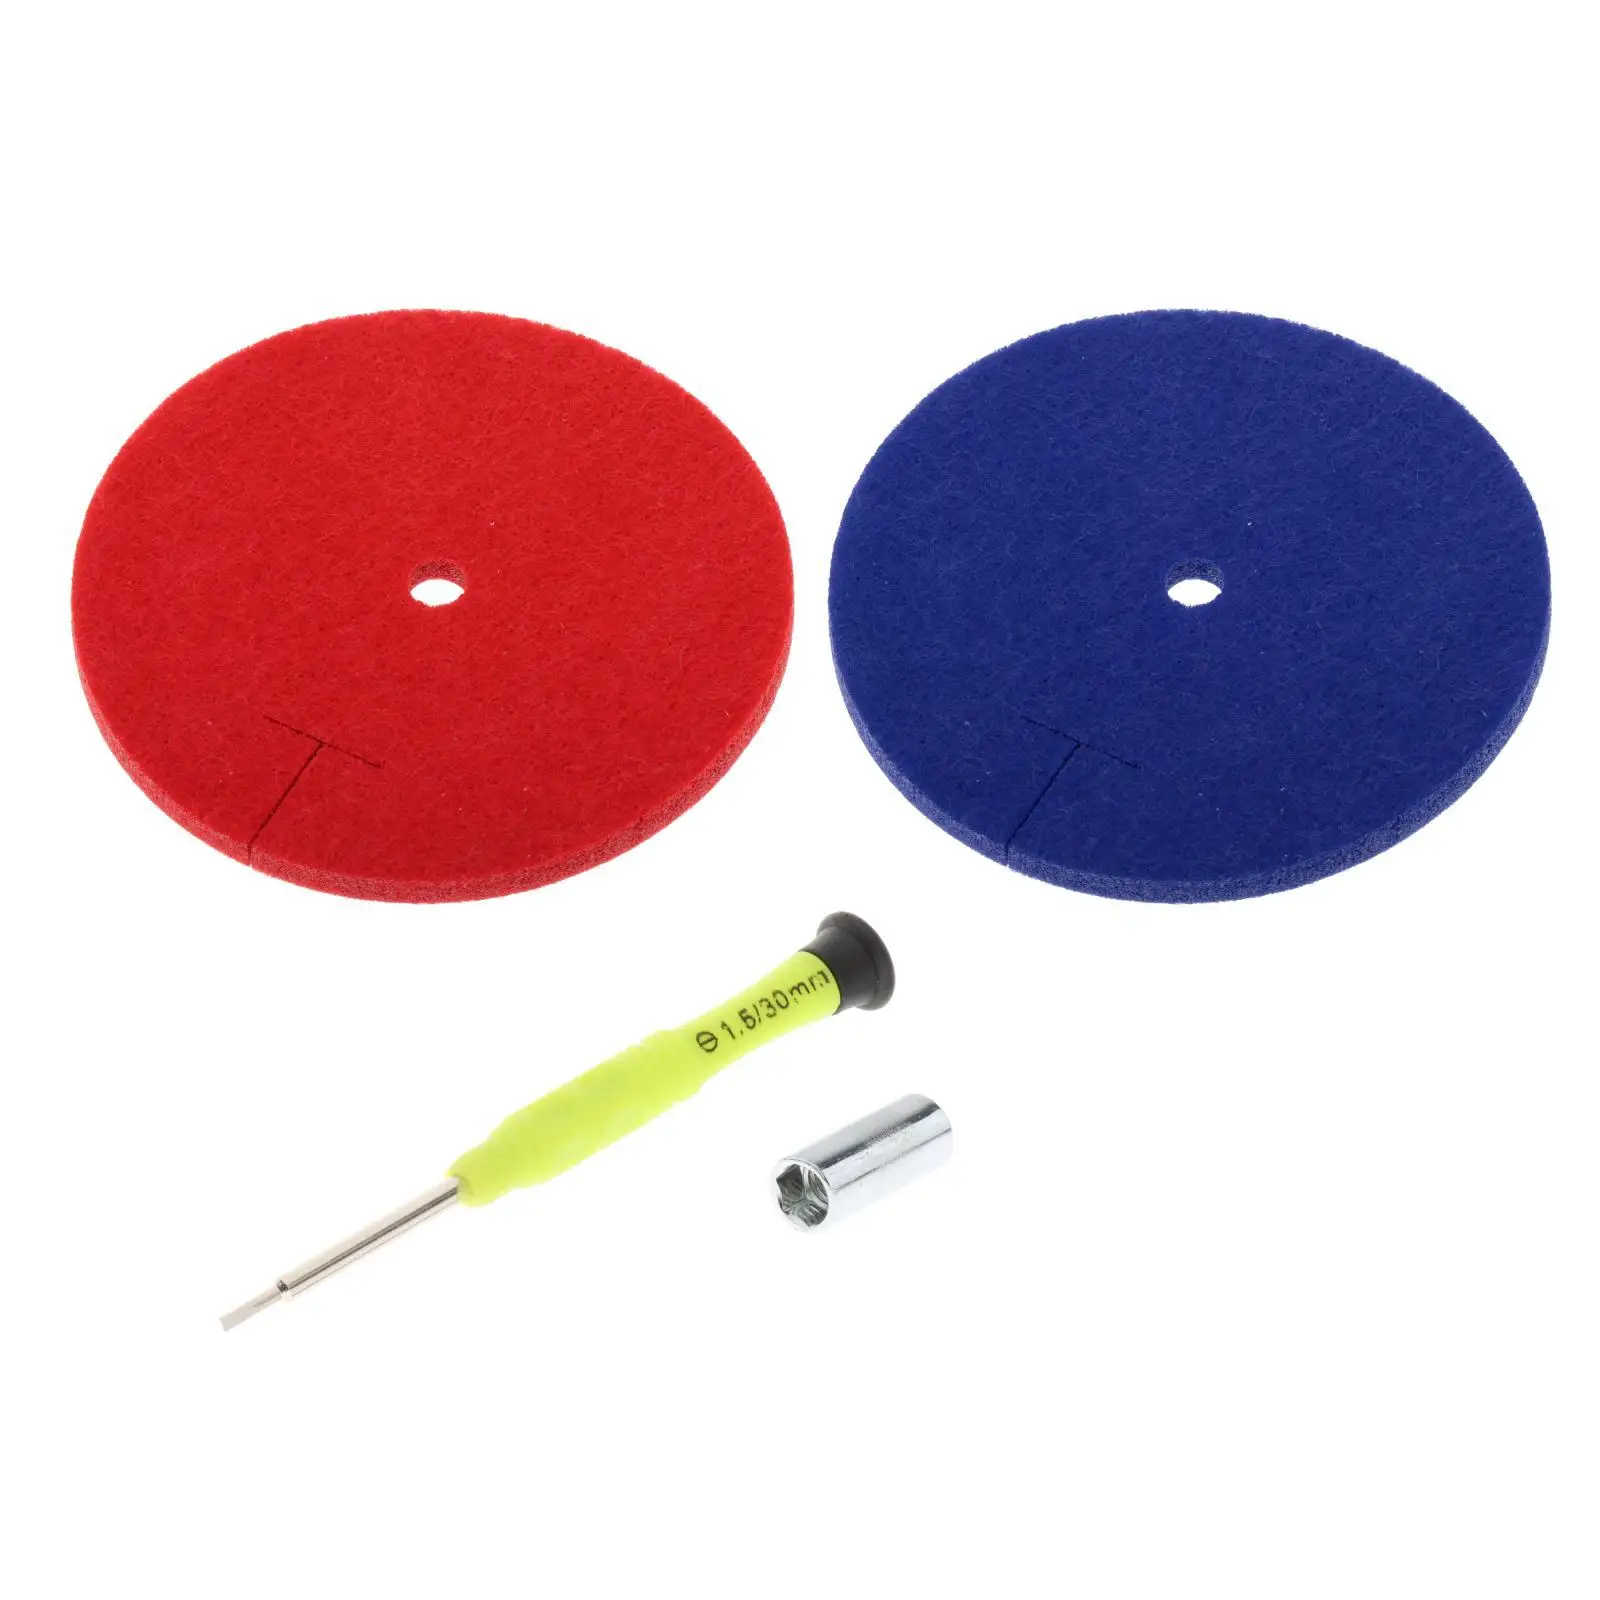 Fencing Guard Pad Foil Hand Protector Simple to Use for Fencing Competitions